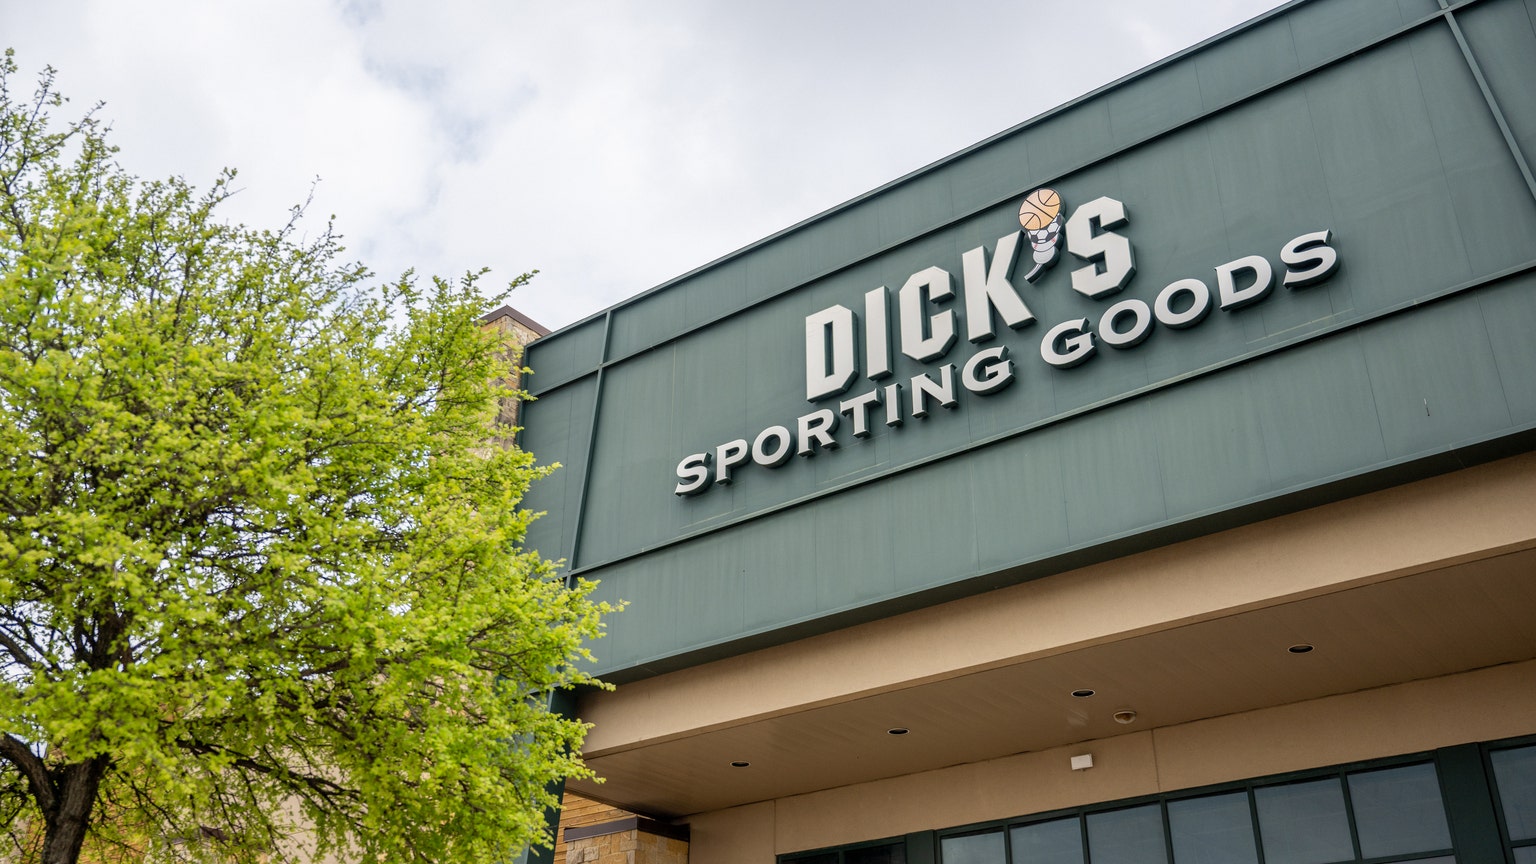 Dick's Sporting Goods Supply Chain Moves Including Testing Lockers